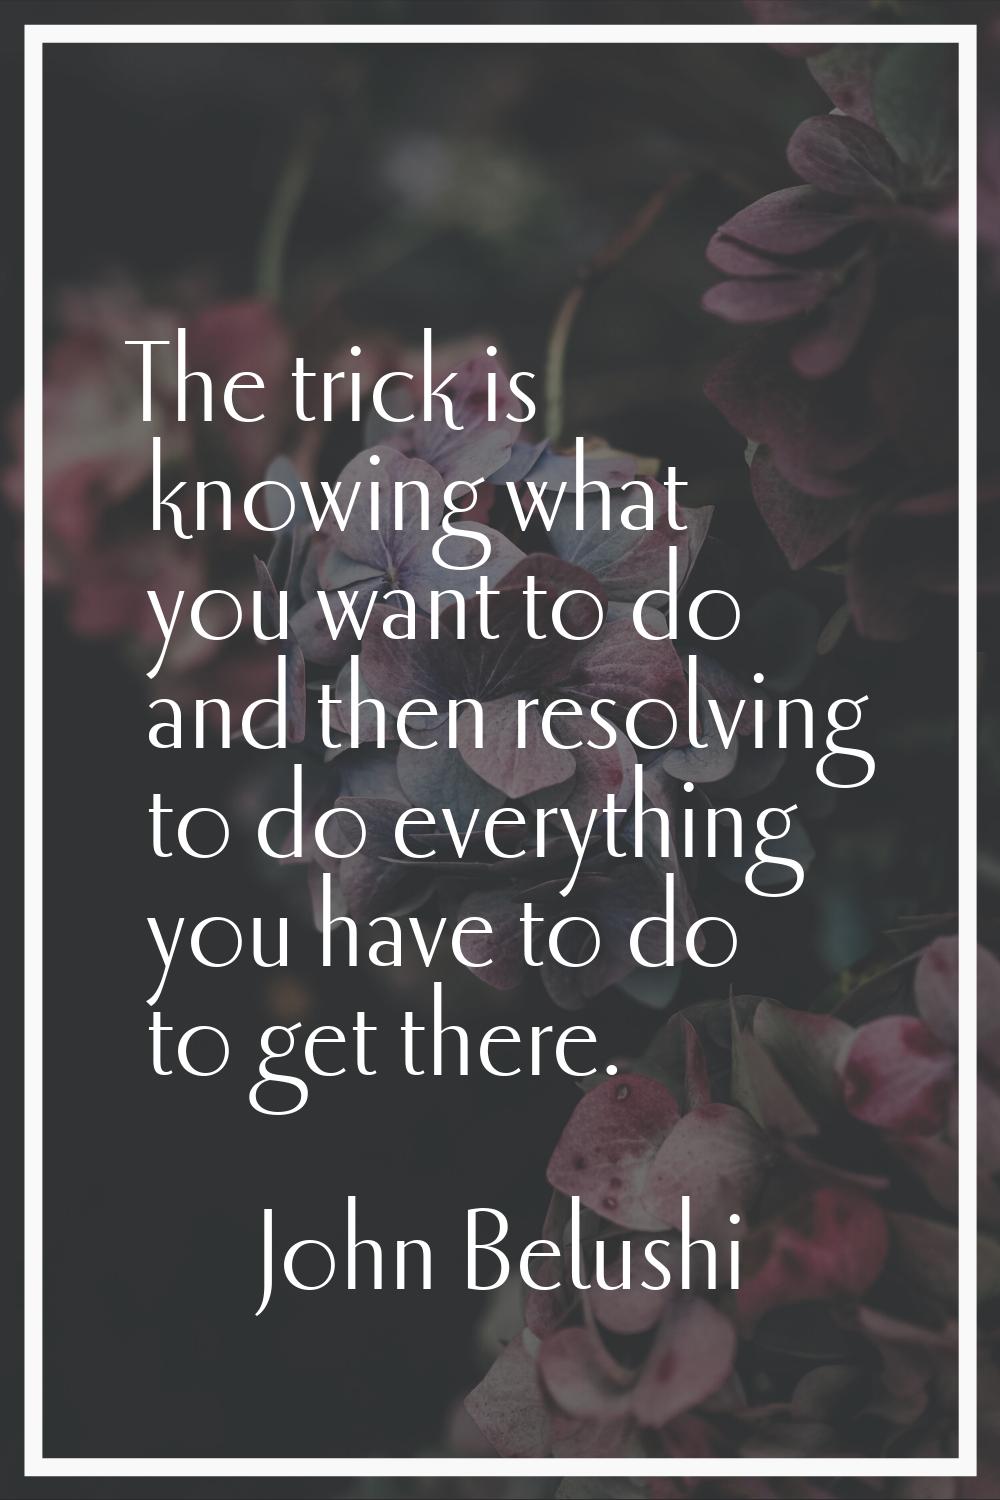 The trick is knowing what you want to do and then resolving to do everything you have to do to get 